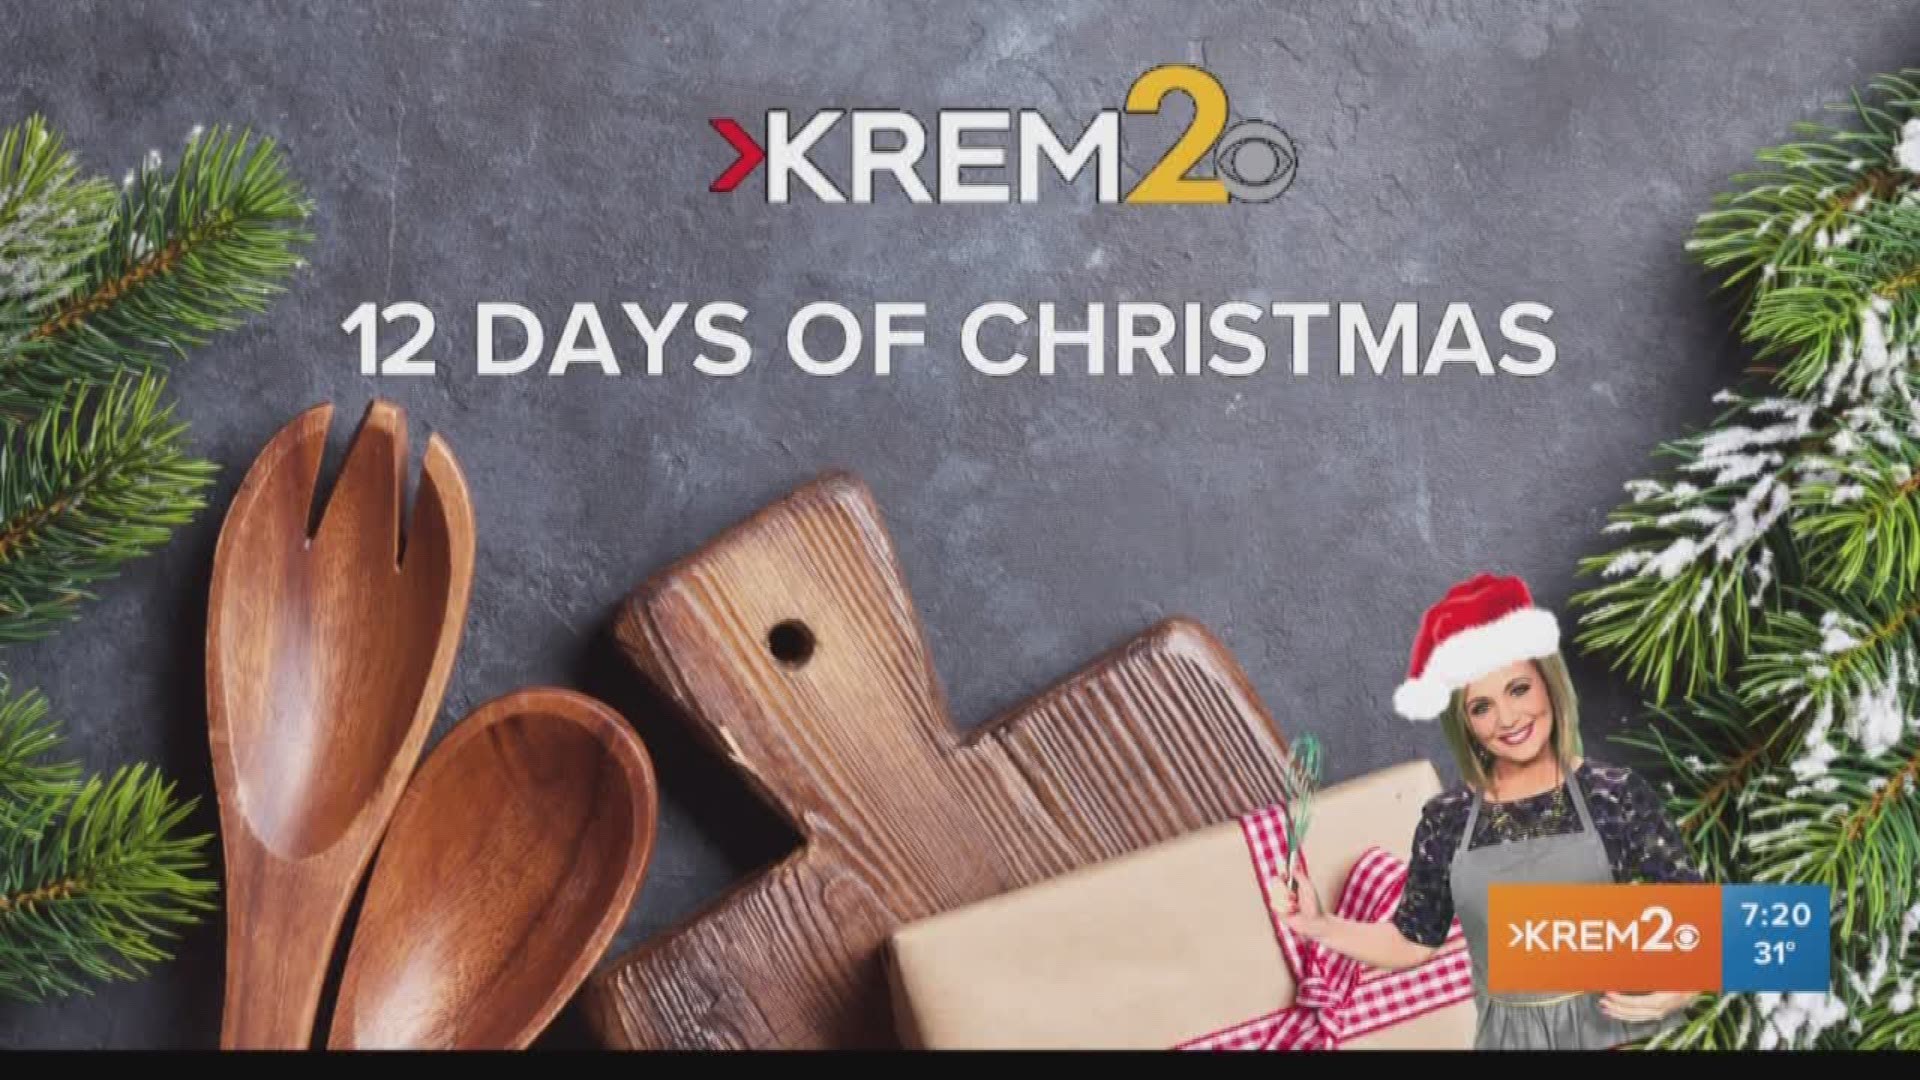 Brittany Bailey and Evan Noorani are making cream wafer cookies for KREM's 12 Days of Christmas.